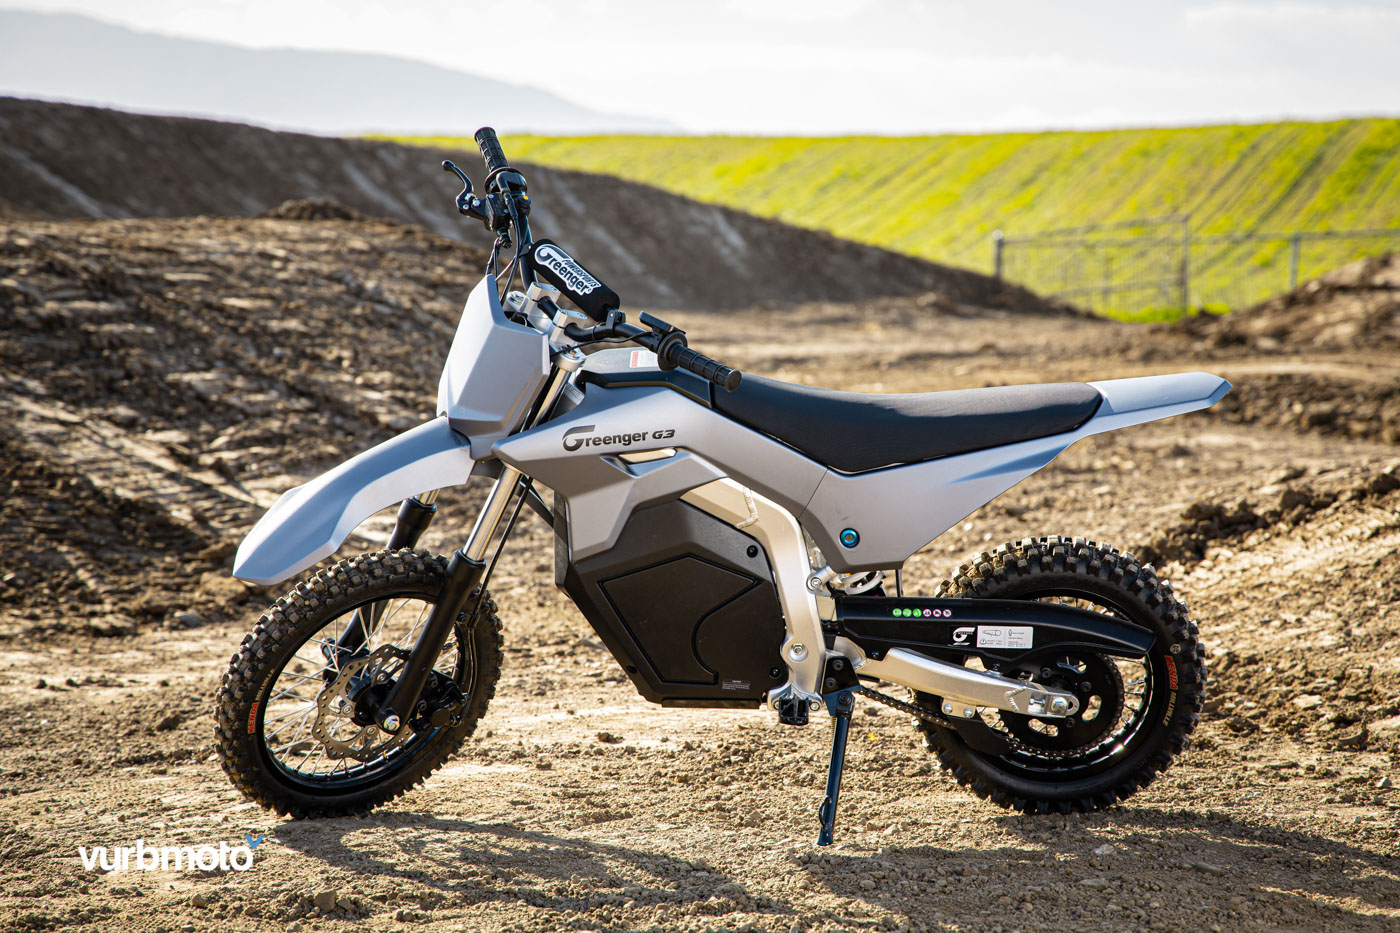 The First Ever Electric 110cc/Pitbike Equivalent?! - vurbmoto